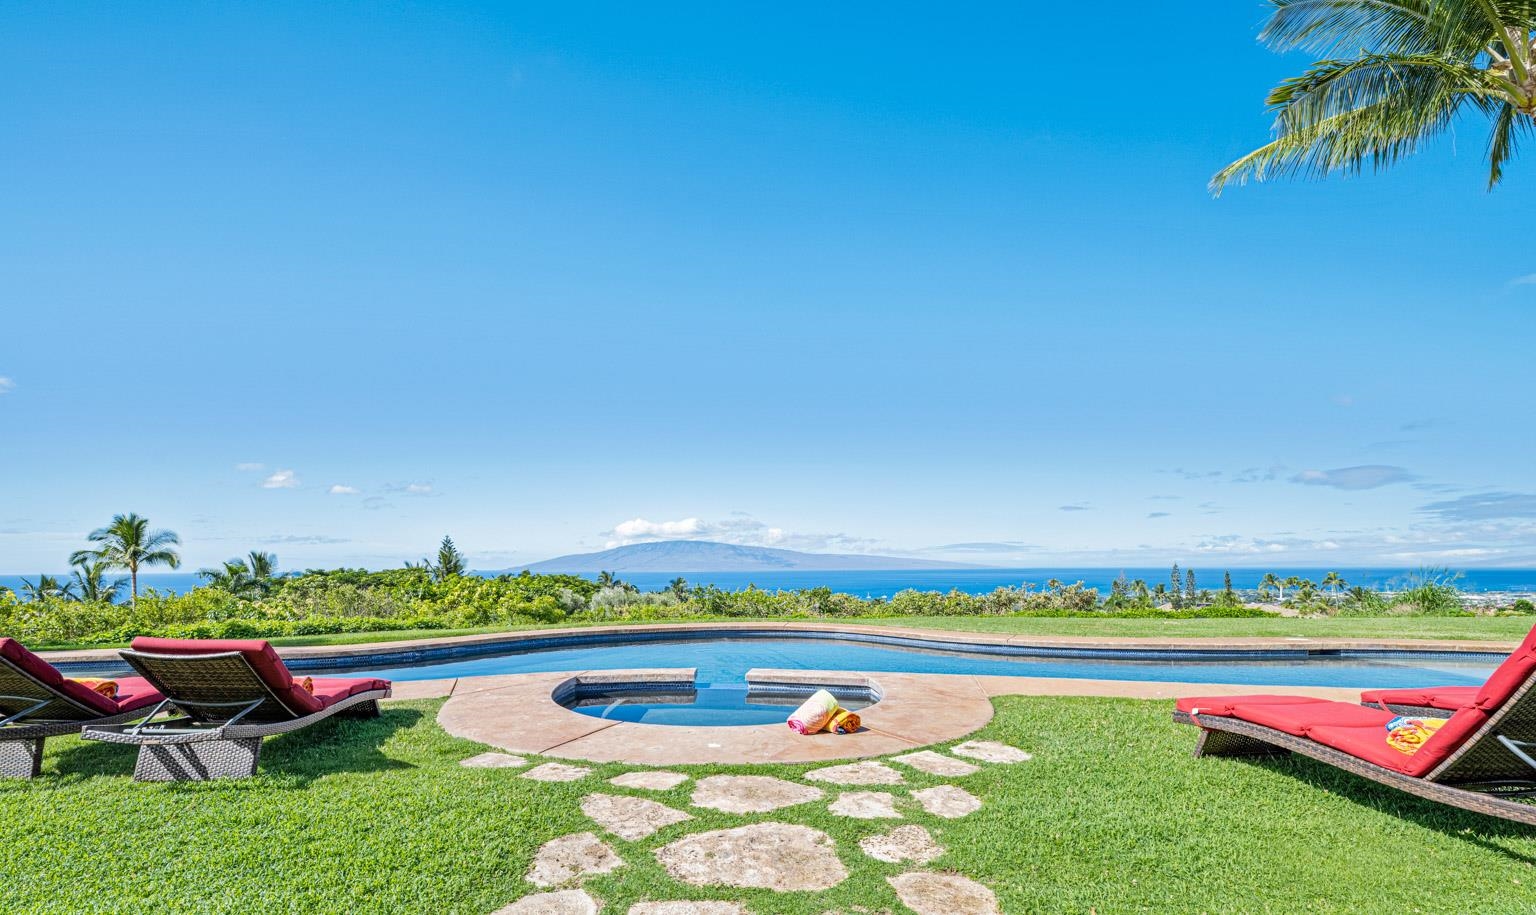 80 Lauawa  Place is a luxurious Maui estate located in Launiupoko. Sitting on 4.16-acres, the estate boasts spectacular views of Molokai, Lanai, and Kahoolawe. This elegant estate includes a 4-bedroom, 5.5-bathroom main villa, and a 1-bedroom, 1-bath detached cottage with its own pool and 2-car garage. In addition, a separate 2,000 Sq. Ft.  barn structure is home to two, 2-car garages providing ample space for cars and recreational equipment.    A Balinese-inspired design boasts a high-beam formal living room, a beautiful kitchen with granite countertops and cherry-wood cabinetry, crown moldings, and pocket sliding glass doors that retract, offering iconic indoor-outdoor Hawaiian-style living.    The perfectly designed outside living space boasts lavish relaxation areas, including the covered lanai with a fully equipped wet bar, a jetted spa, and a beach-style entry swimming pool. Imagine taking in breathtaking sunsets with panoramic views of the Pacific Ocean and the outer islands in the backdrop, enjoying a family barbecue or decompressing by the pool. Snuggle up with a novel under the covered lanai, or lose yourself in time just breathing in the calm ocean air and delighting in the melodic sound of palm trees blowing in the wind.  The grounds include a sustainable farm, with orchards of fresh Hawaiian fruits, including papaya, lilikoi (passion fruit), bananas, and citrus varietals. The air is perfumed by the sweet aroma of plumeria, night-blooming jasmine, and gardenia.  Location wise, the property is conveniently perched above Launiupoko Beach Park, where you can enjoy ocean activities and long days of Maui sunshine. In addition, Lahaina Town and its restaurants, shopping, and nightlife is a short five-minute drive from home.  Hosting spectacular 360-degree views, from the backdrop of the West Maui mountain range to the Pacific Ocean and the outer isles of Lanai, Molokai, and Kahoolawe, you will marvel at the magical Maui sunsets, night after night.   80 Lauawa Place is an exotic, elegant Hawaiian home. Contact us for more information on this stand-out property.  Motivated seller - this property is offered for less than you can build it for today!  80 Lau Awa Place is an exotic, elegant Hawaiian home.  Motivated seller - this property is offered for less than you can build it for today!  Main Home: https://my.matterport.com/show/?m=8Au3rEK3ACk&mls=1  Ohana Tour: https://my.matterport.com/show/?m=dQ32WUyWyKH&mls=1